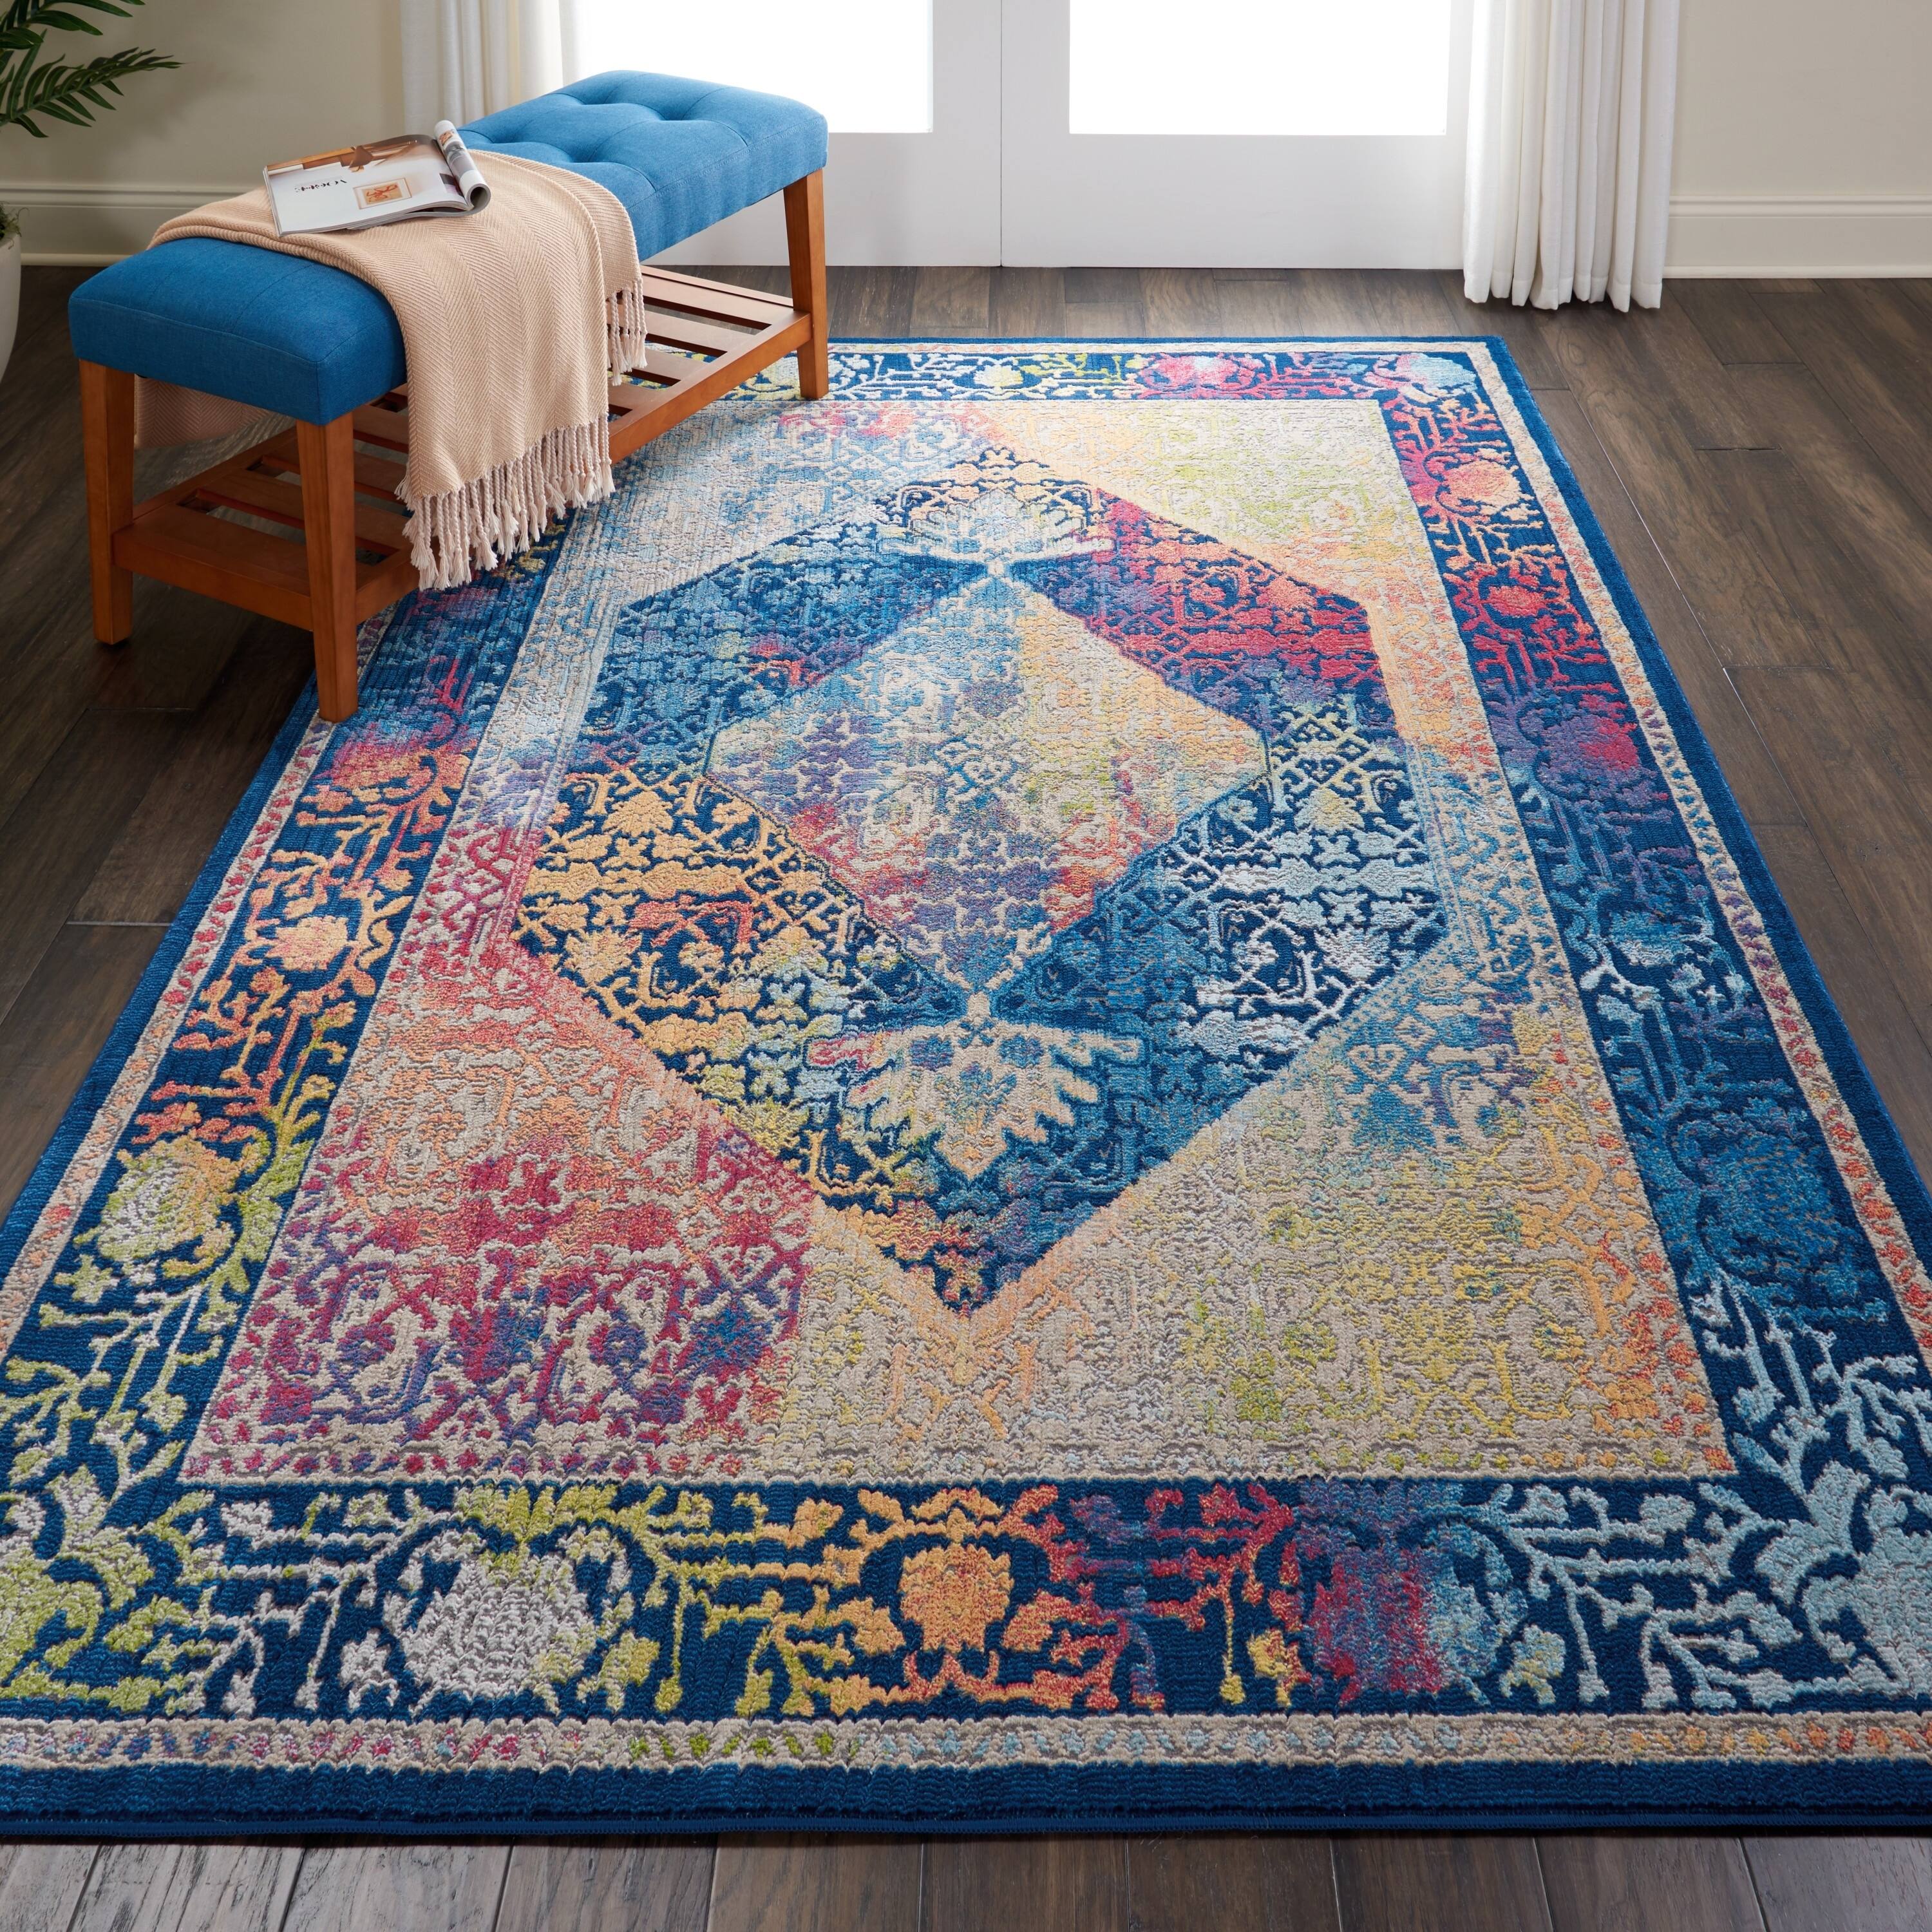 Buy Area Rugs Online at Overstock.com | Our Best Rugs Deals